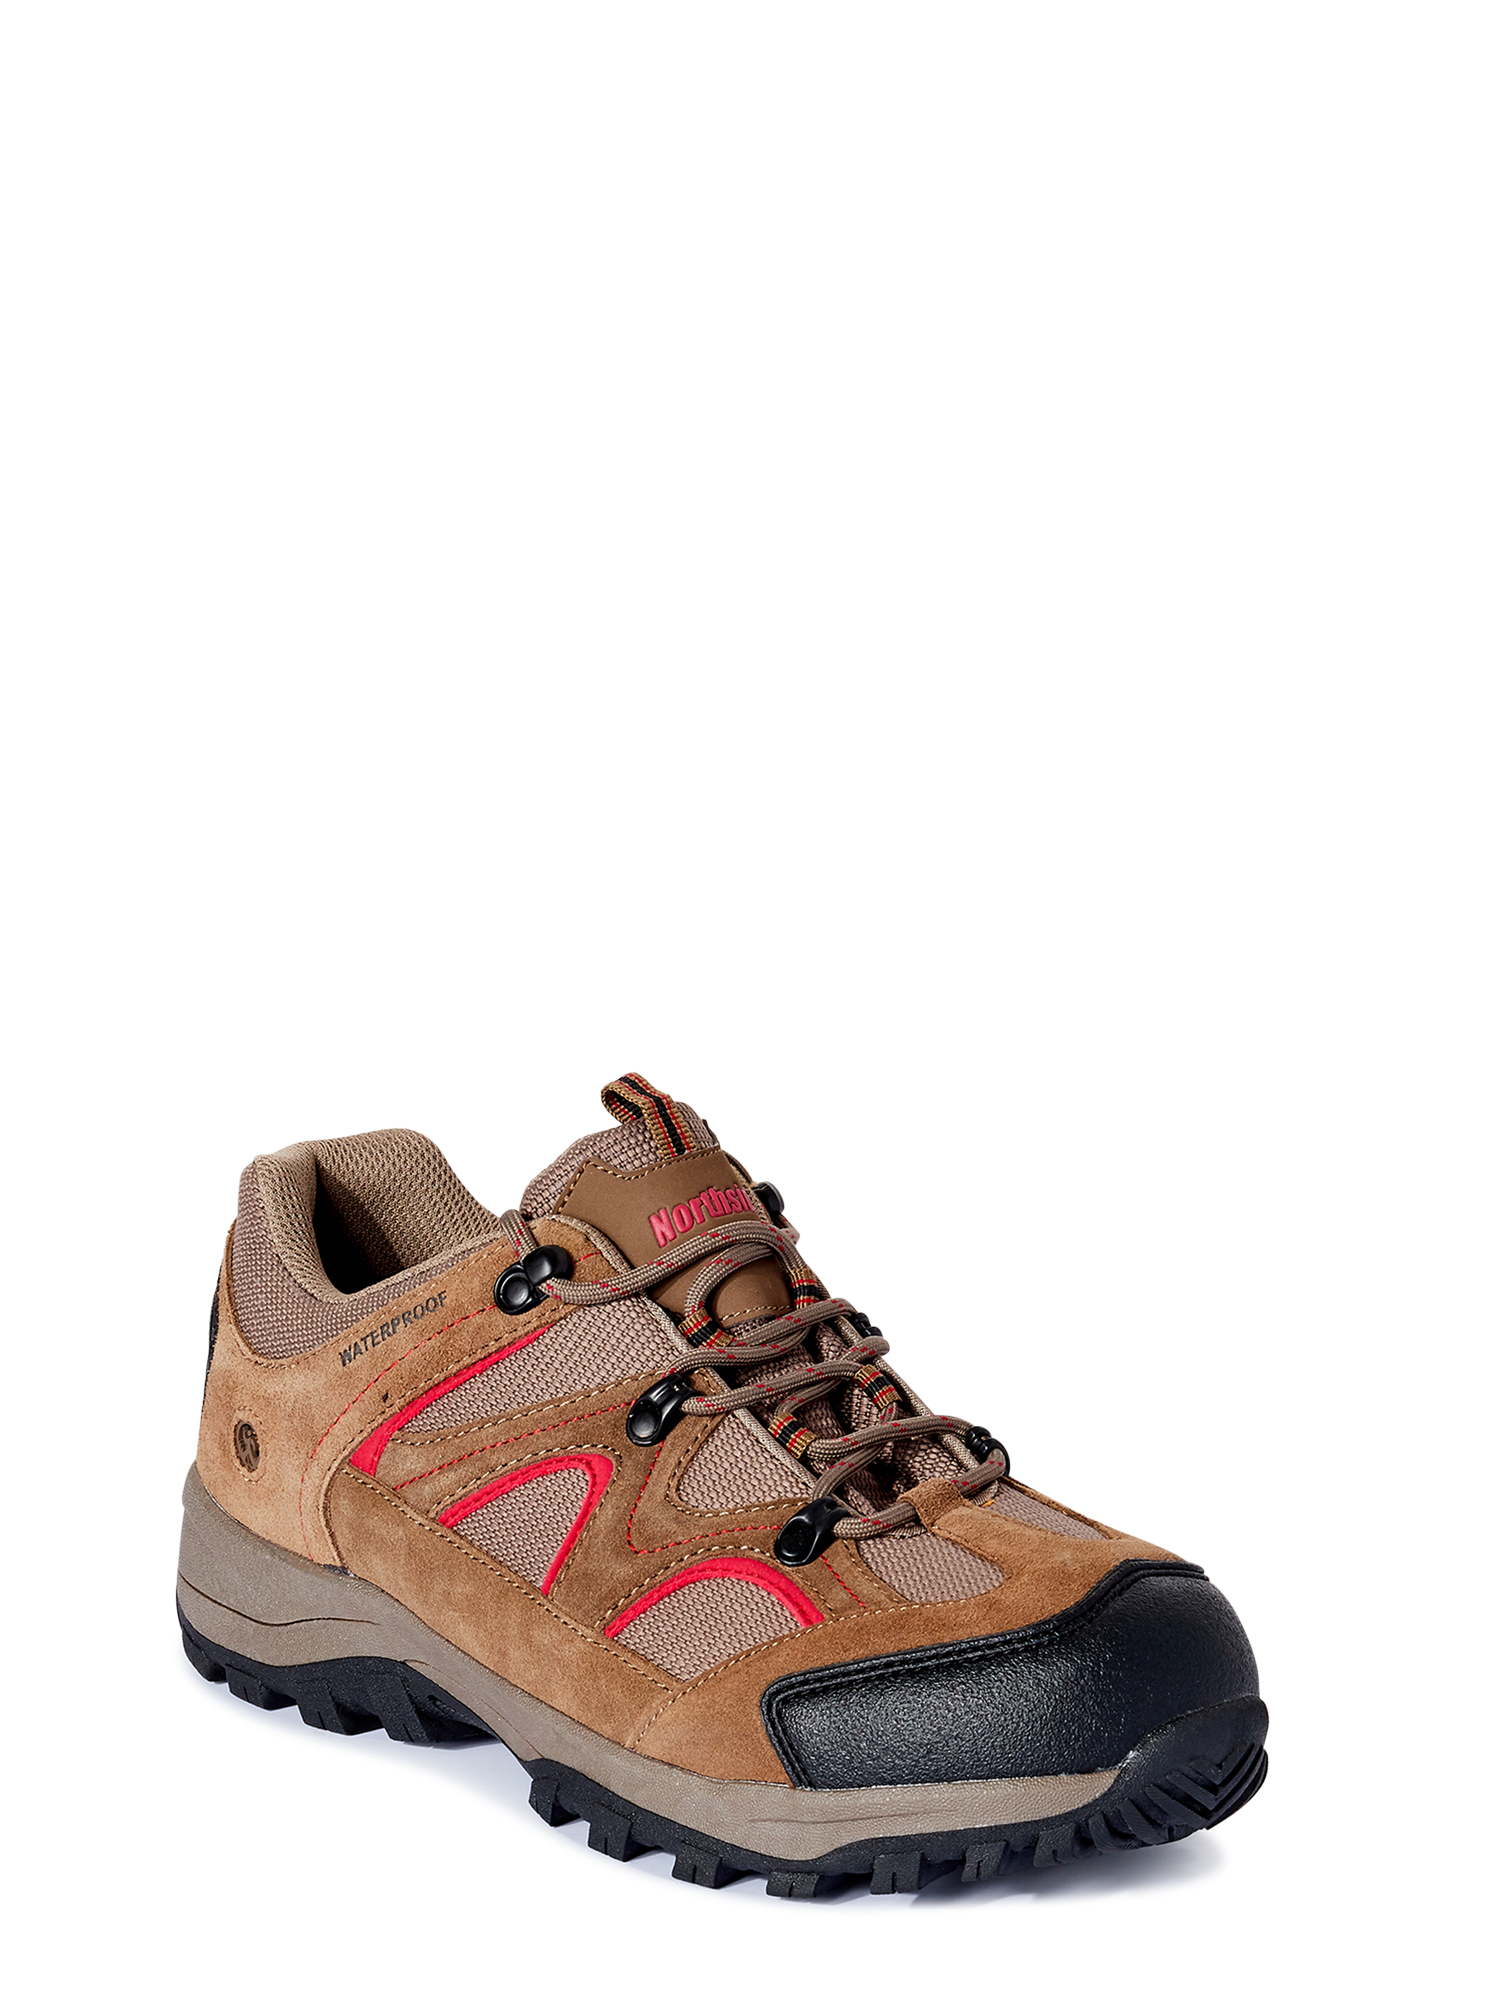 Northside Men's Snohomish Leather Water Resistant Hiking Shoe (Wide Available) - image 1 of 7